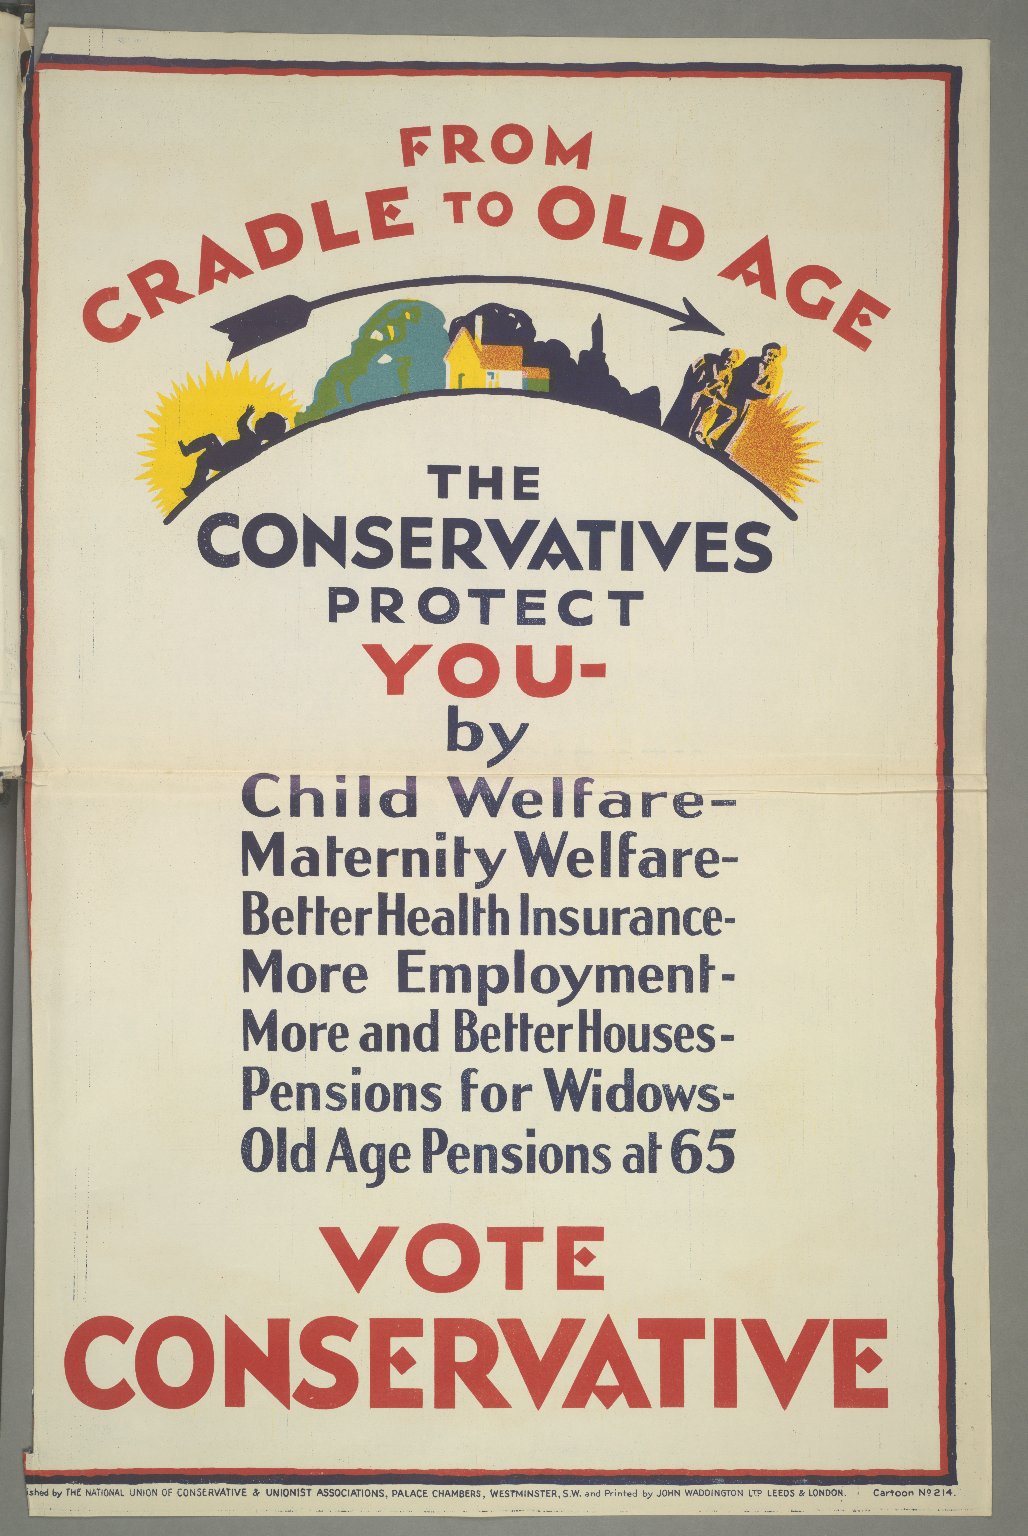 Cradle to Old Age Conservative Party Poster 1929